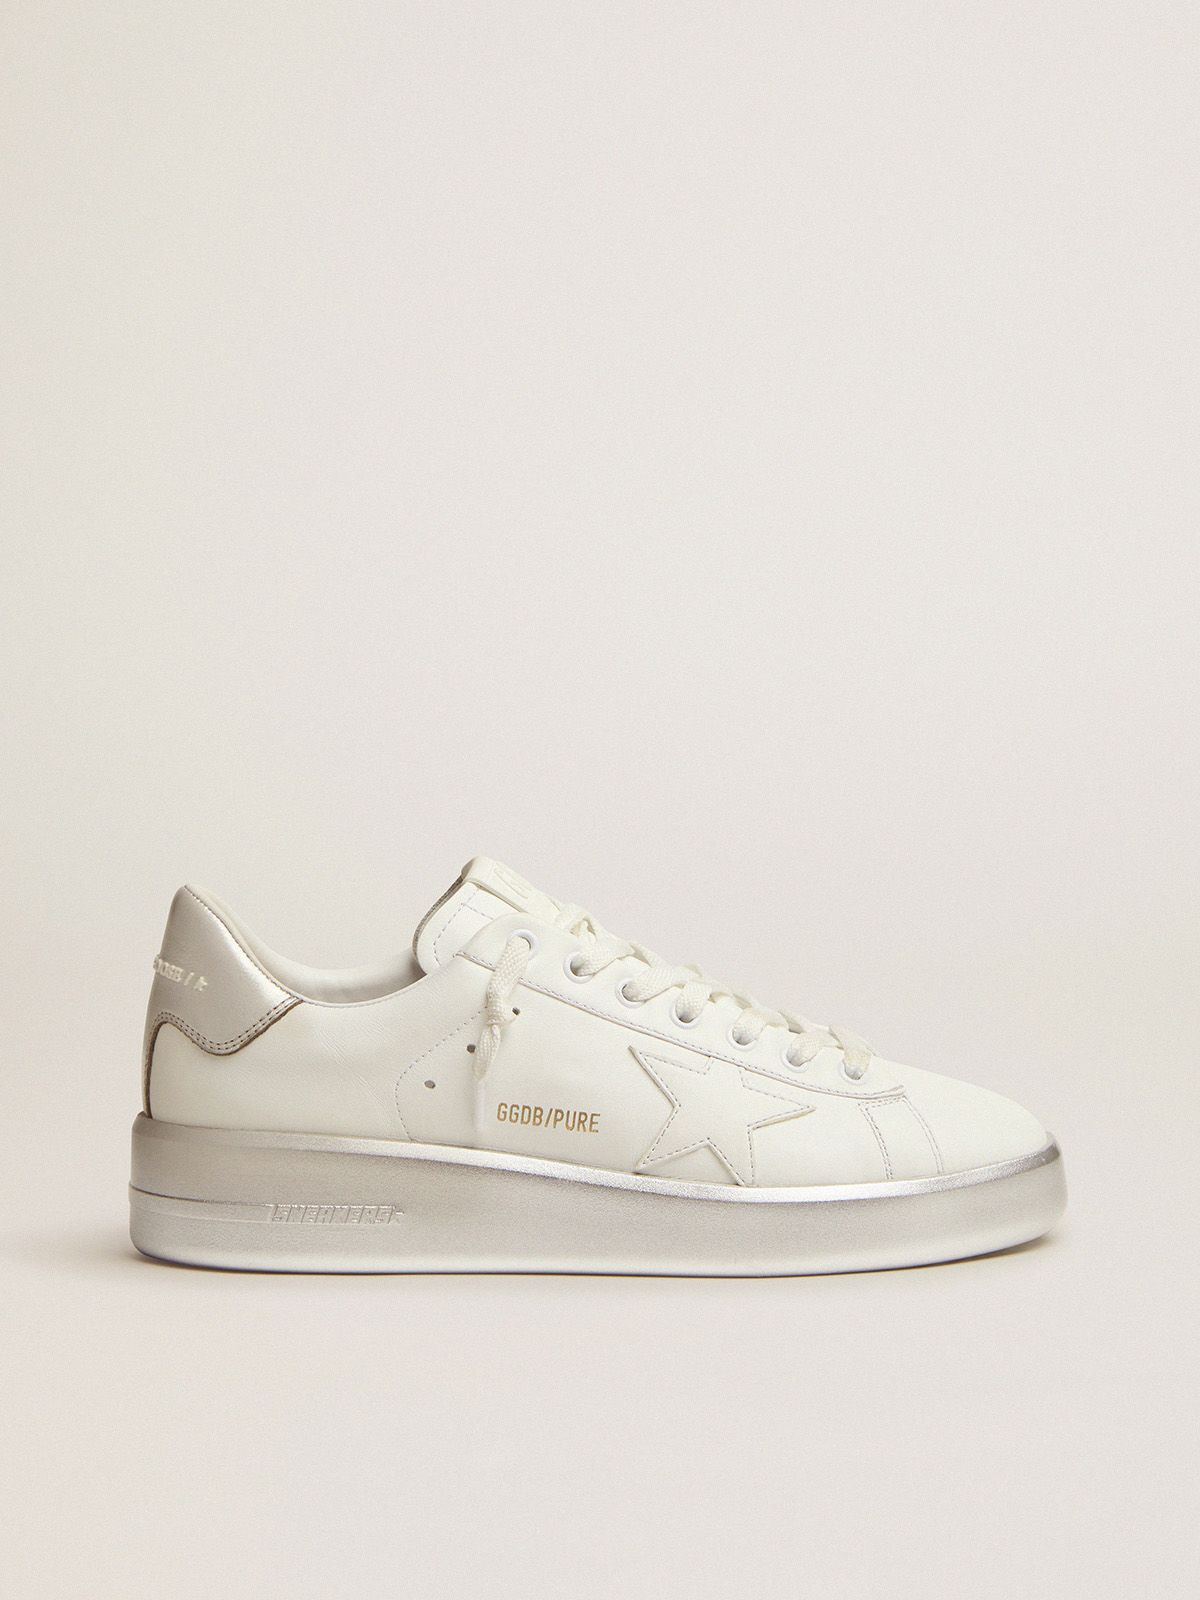 Sneakers Golden Goose Purestar sneakers in white leather with silver laminated heel tab and foxing